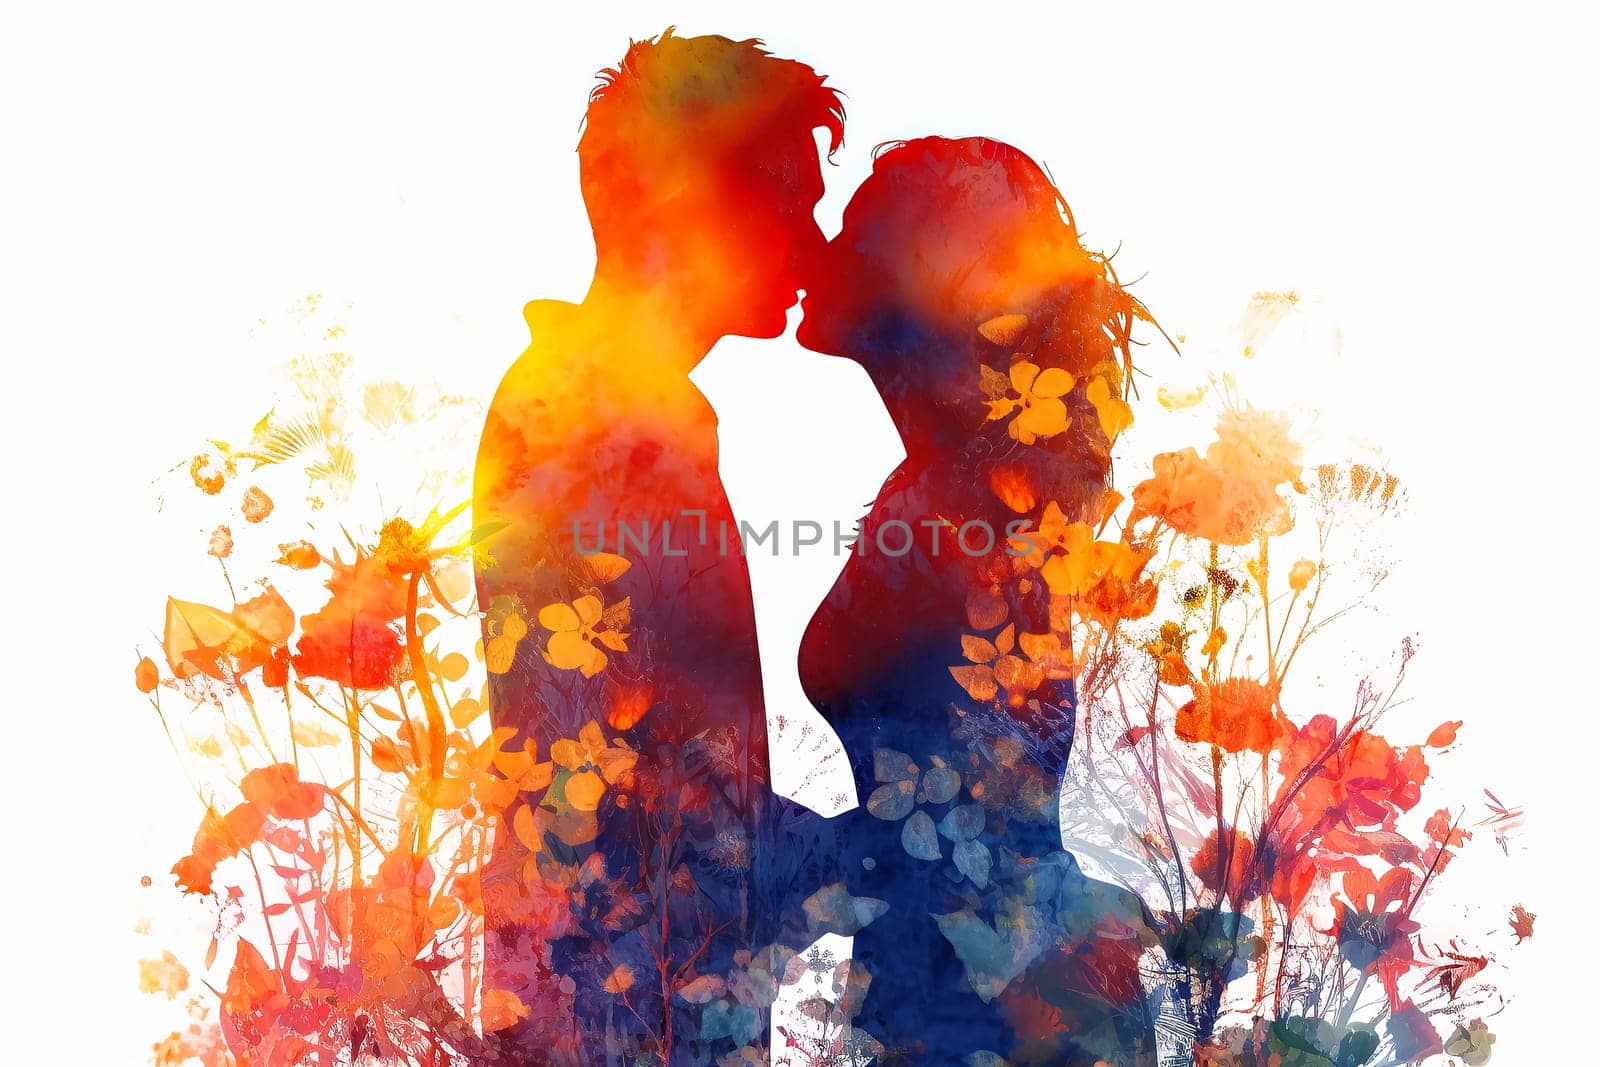 Celebrate loves silhouette with a vibrant watercolor illustration, capturing a couple in a romantic date against a bright background. A vivid expression of togetherness.